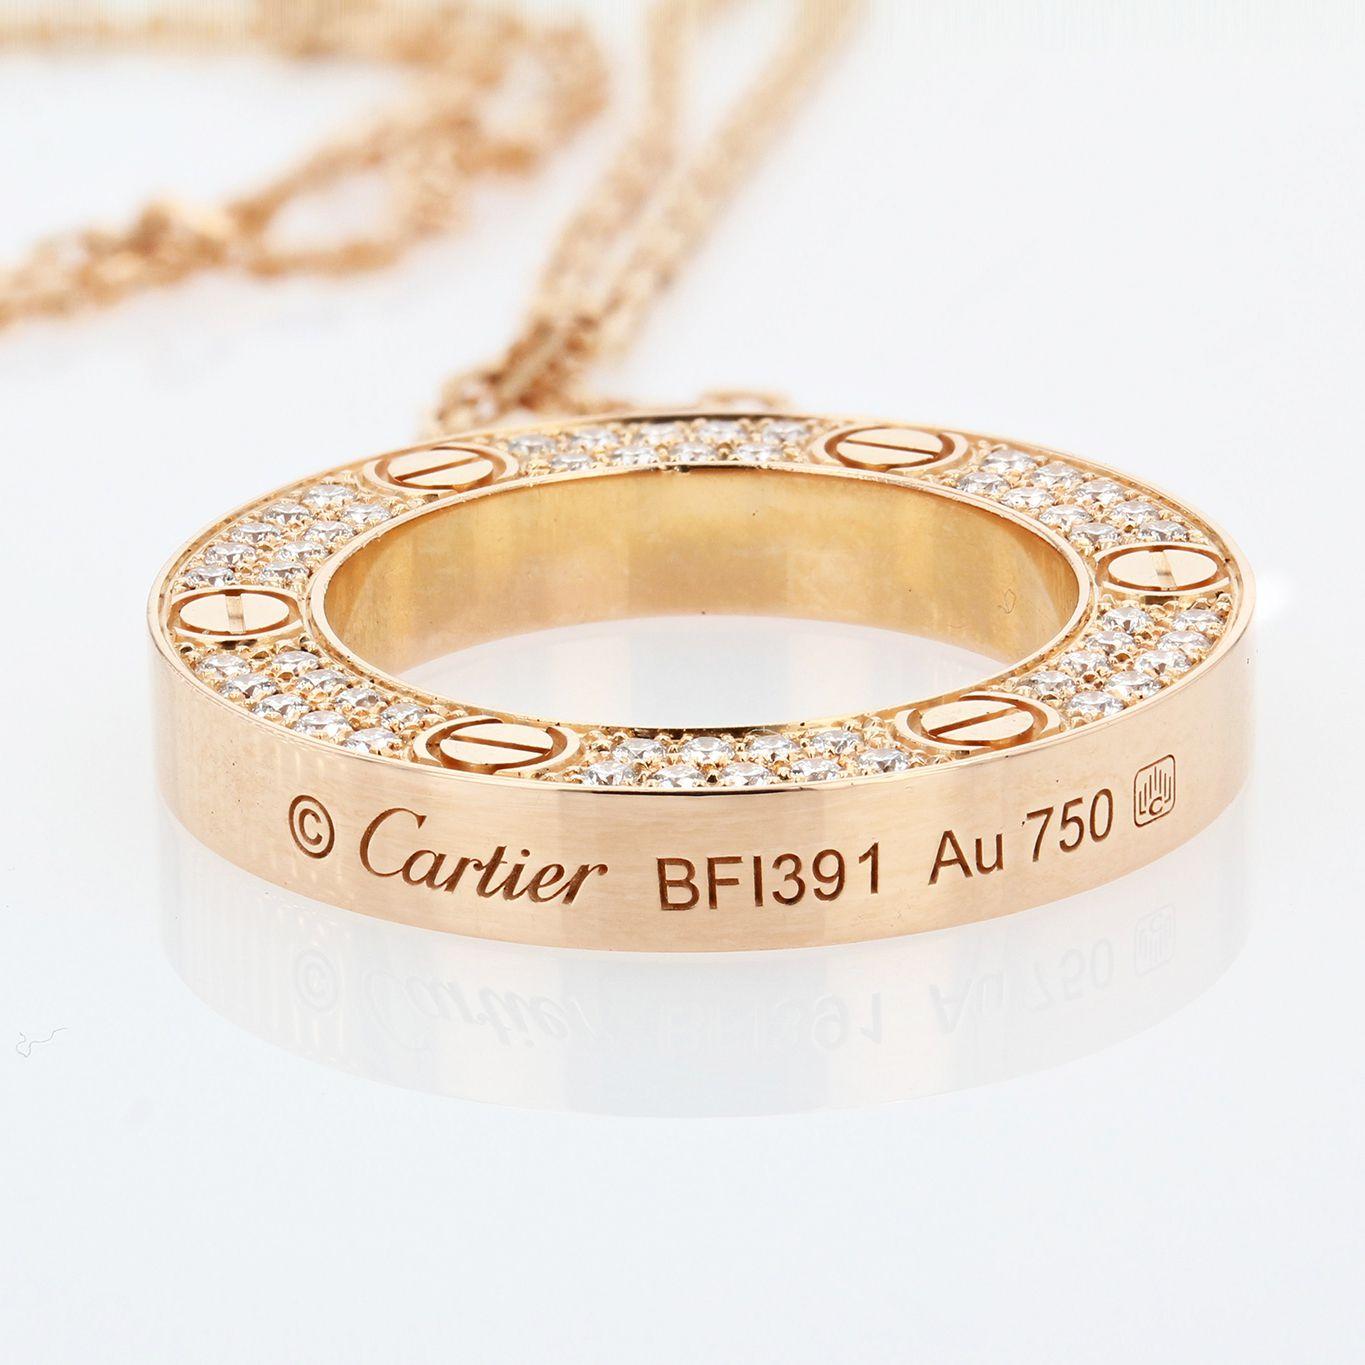 Necklace in 18 karat rose gold.
Necklace signed Cartier from the collection 